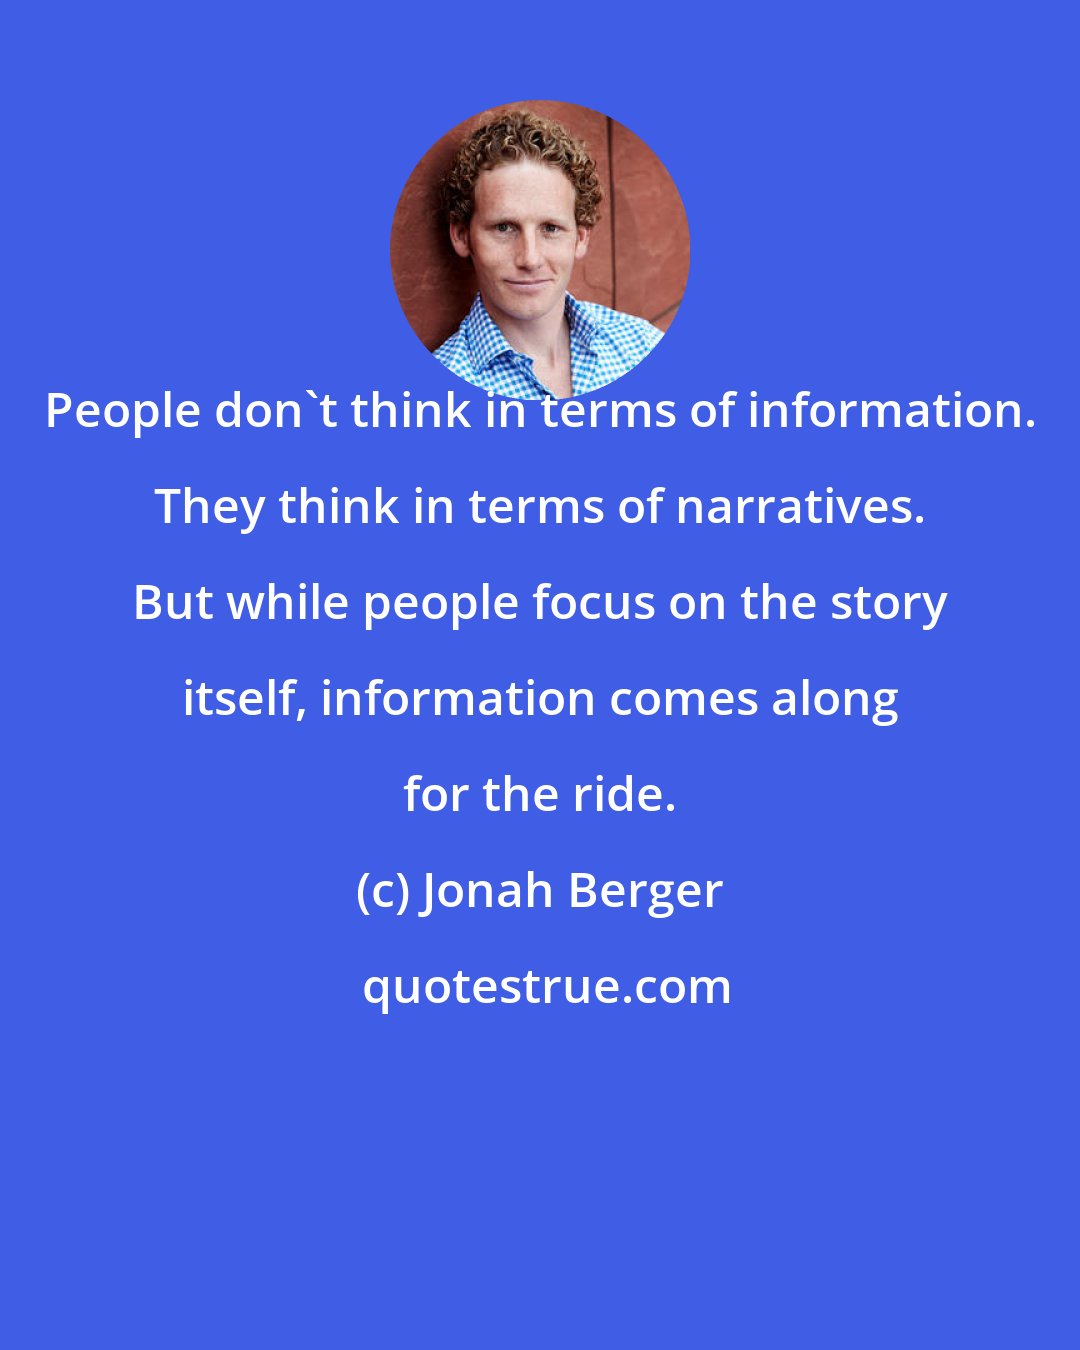 Jonah Berger: People don't think in terms of information. They think in terms of narratives. But while people focus on the story itself, information comes along for the ride.